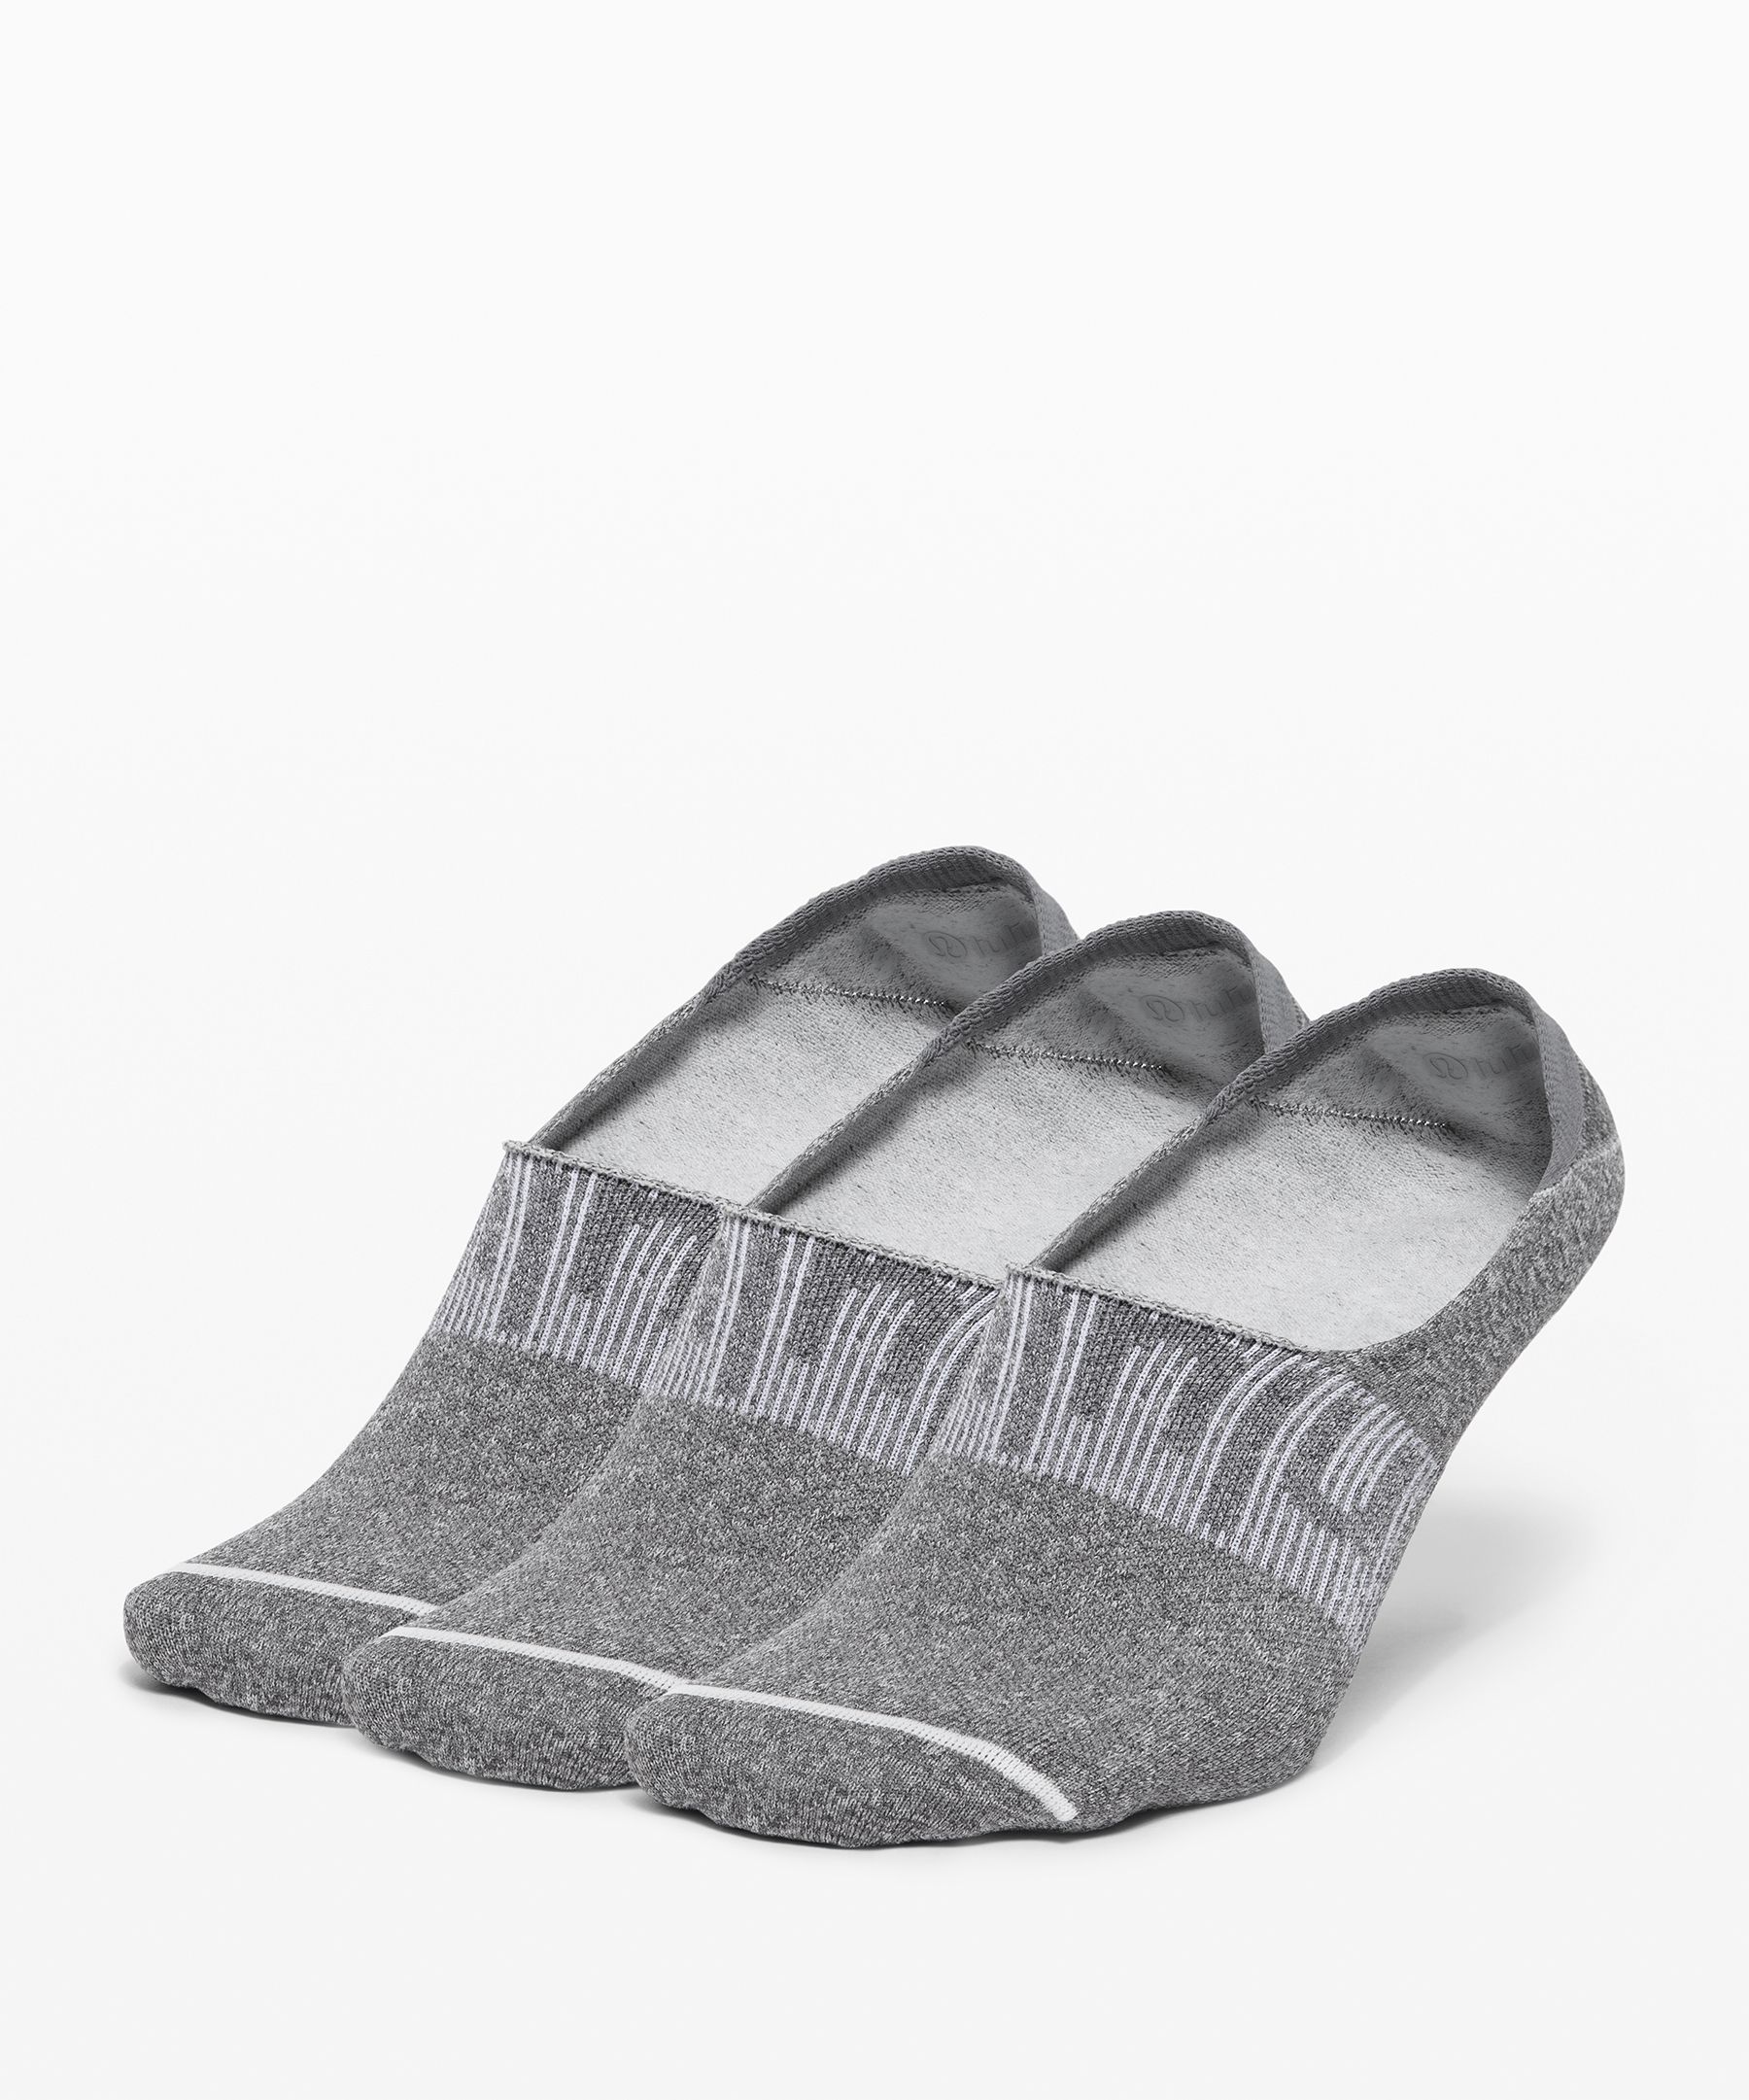 Lululemon Daily Stride No-show Socks 3 Pack In Heathered Graphite Grey